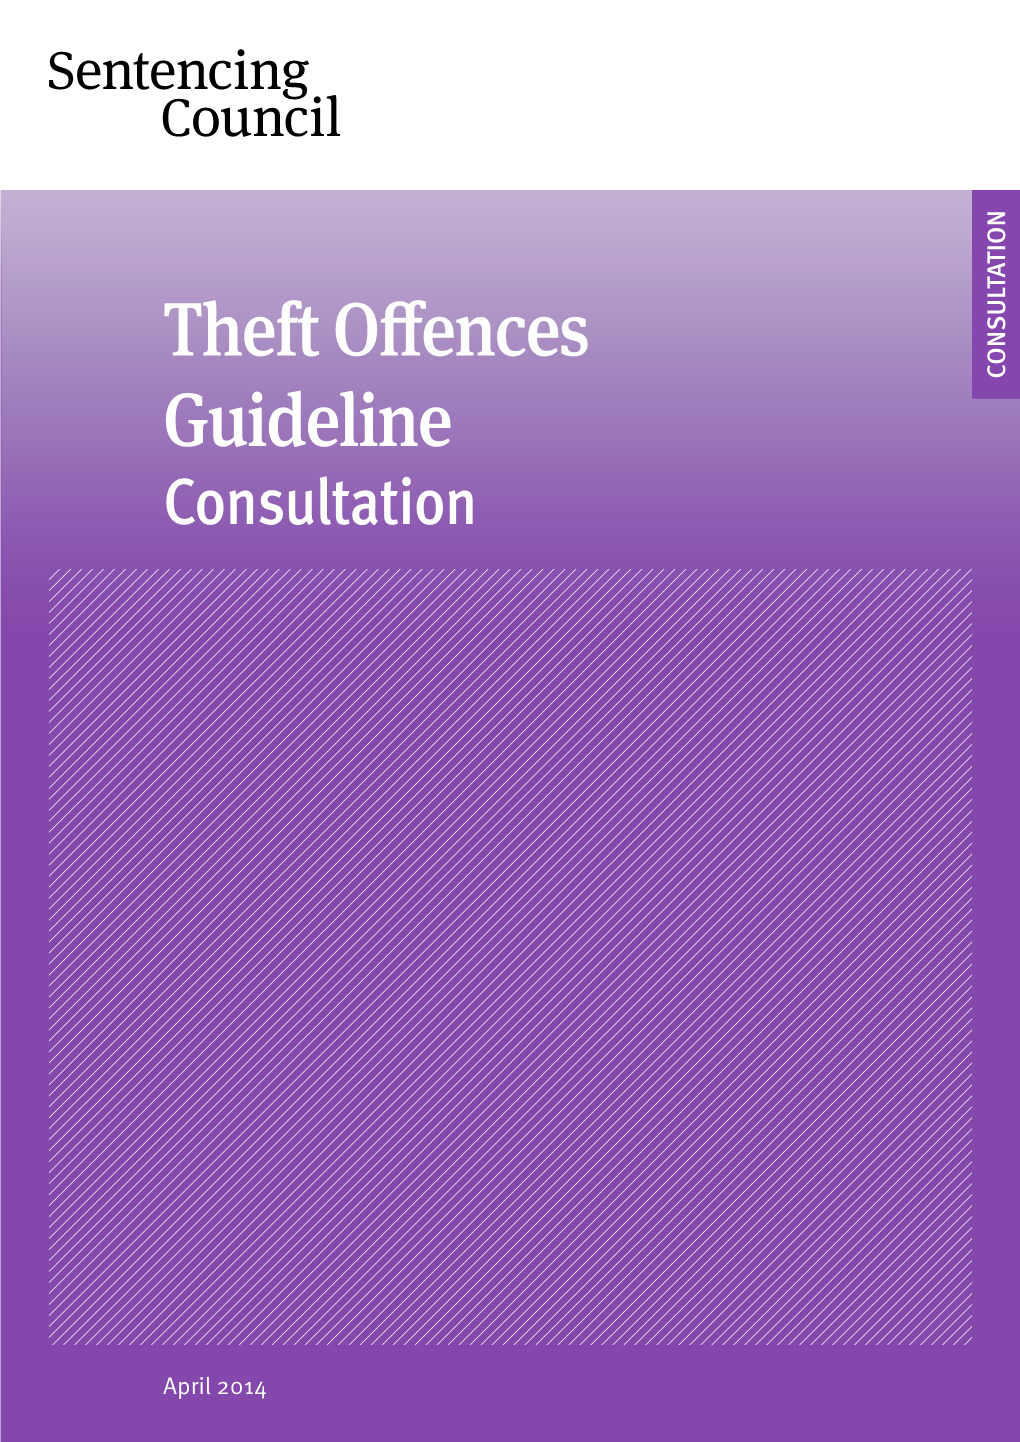 Theft Offences Guideline Consultation